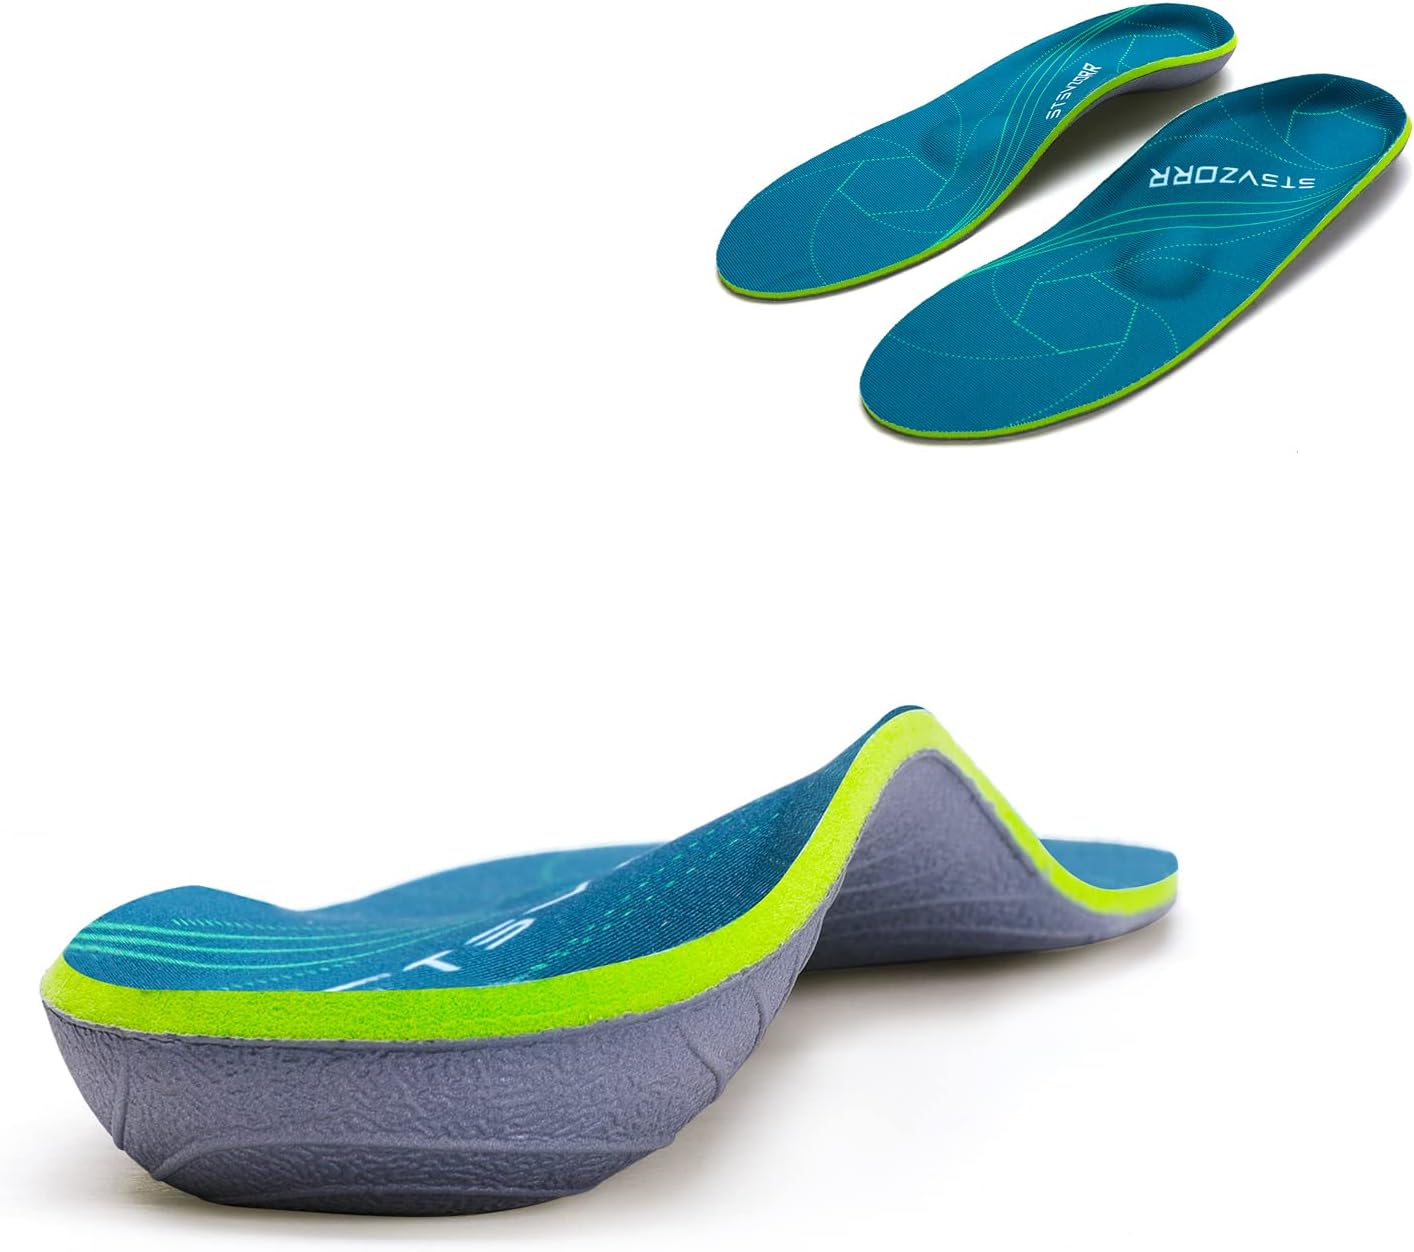 Full-Length Orthopedic Insole for Plantar Fasciitis Arch Support for Flat Feet Heel Spurs and Foot Pain Running Shock Absorption Insert